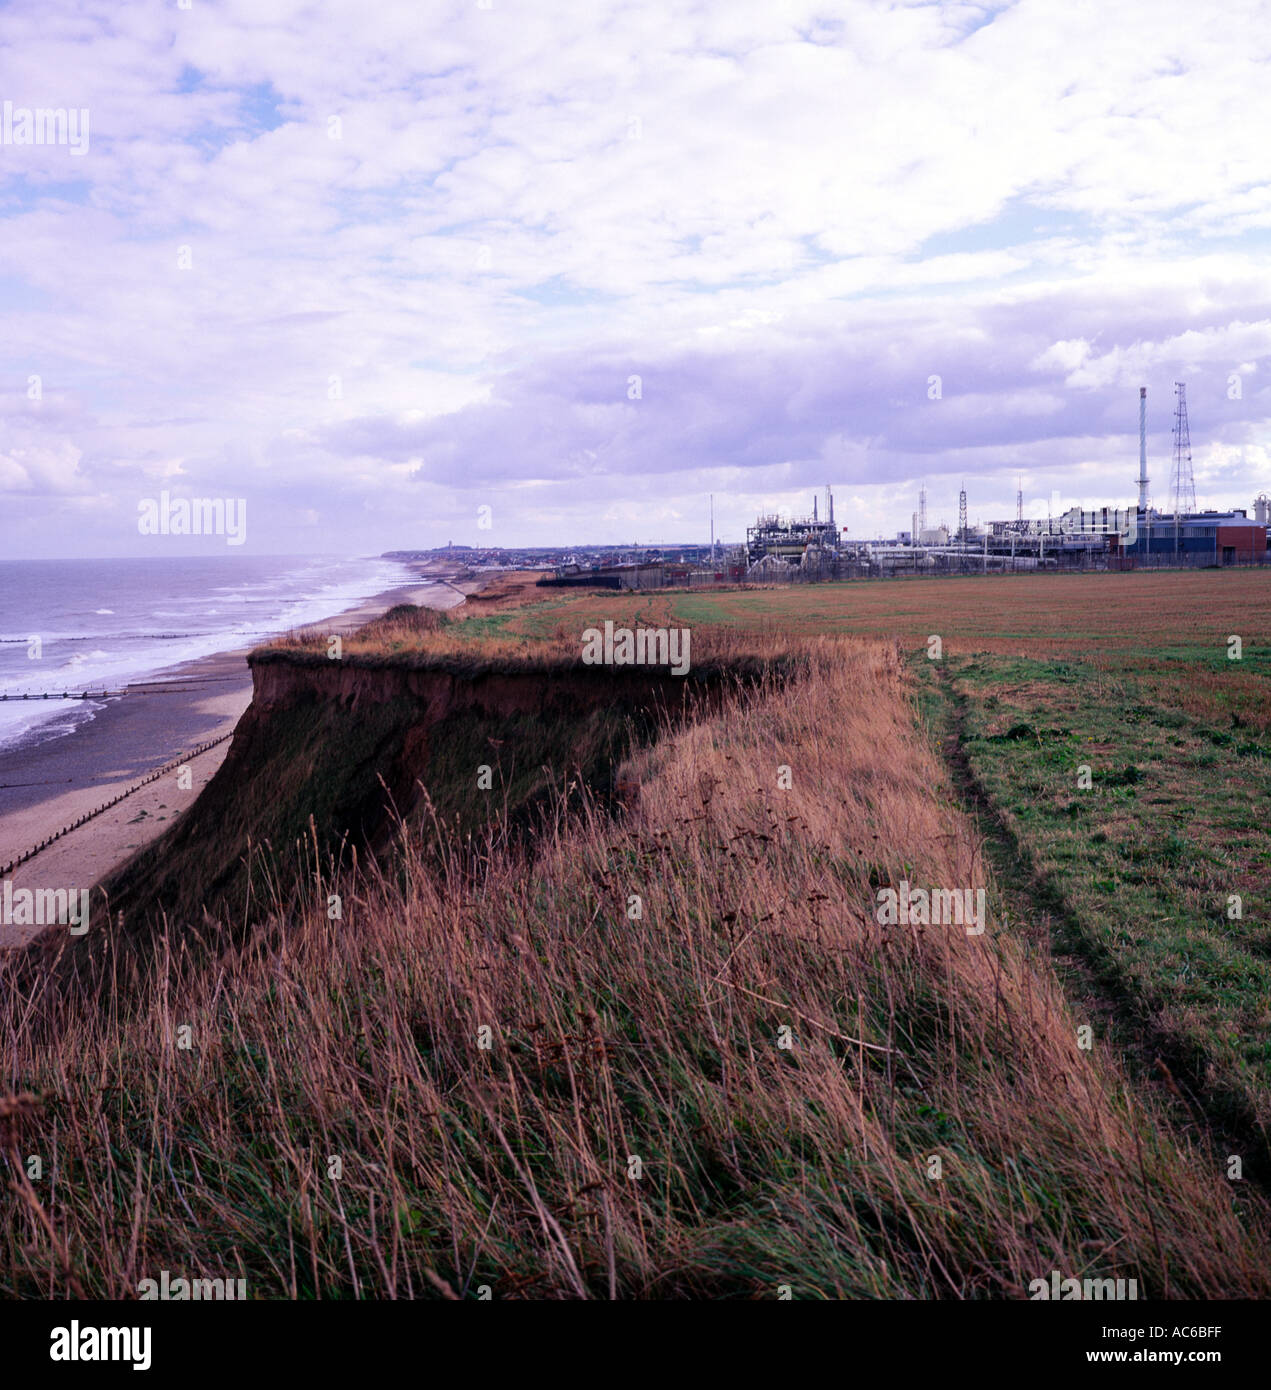 Cliff erosion and revetments used as coastal defence Bacton gas terminal Norfolk England Stock Photo